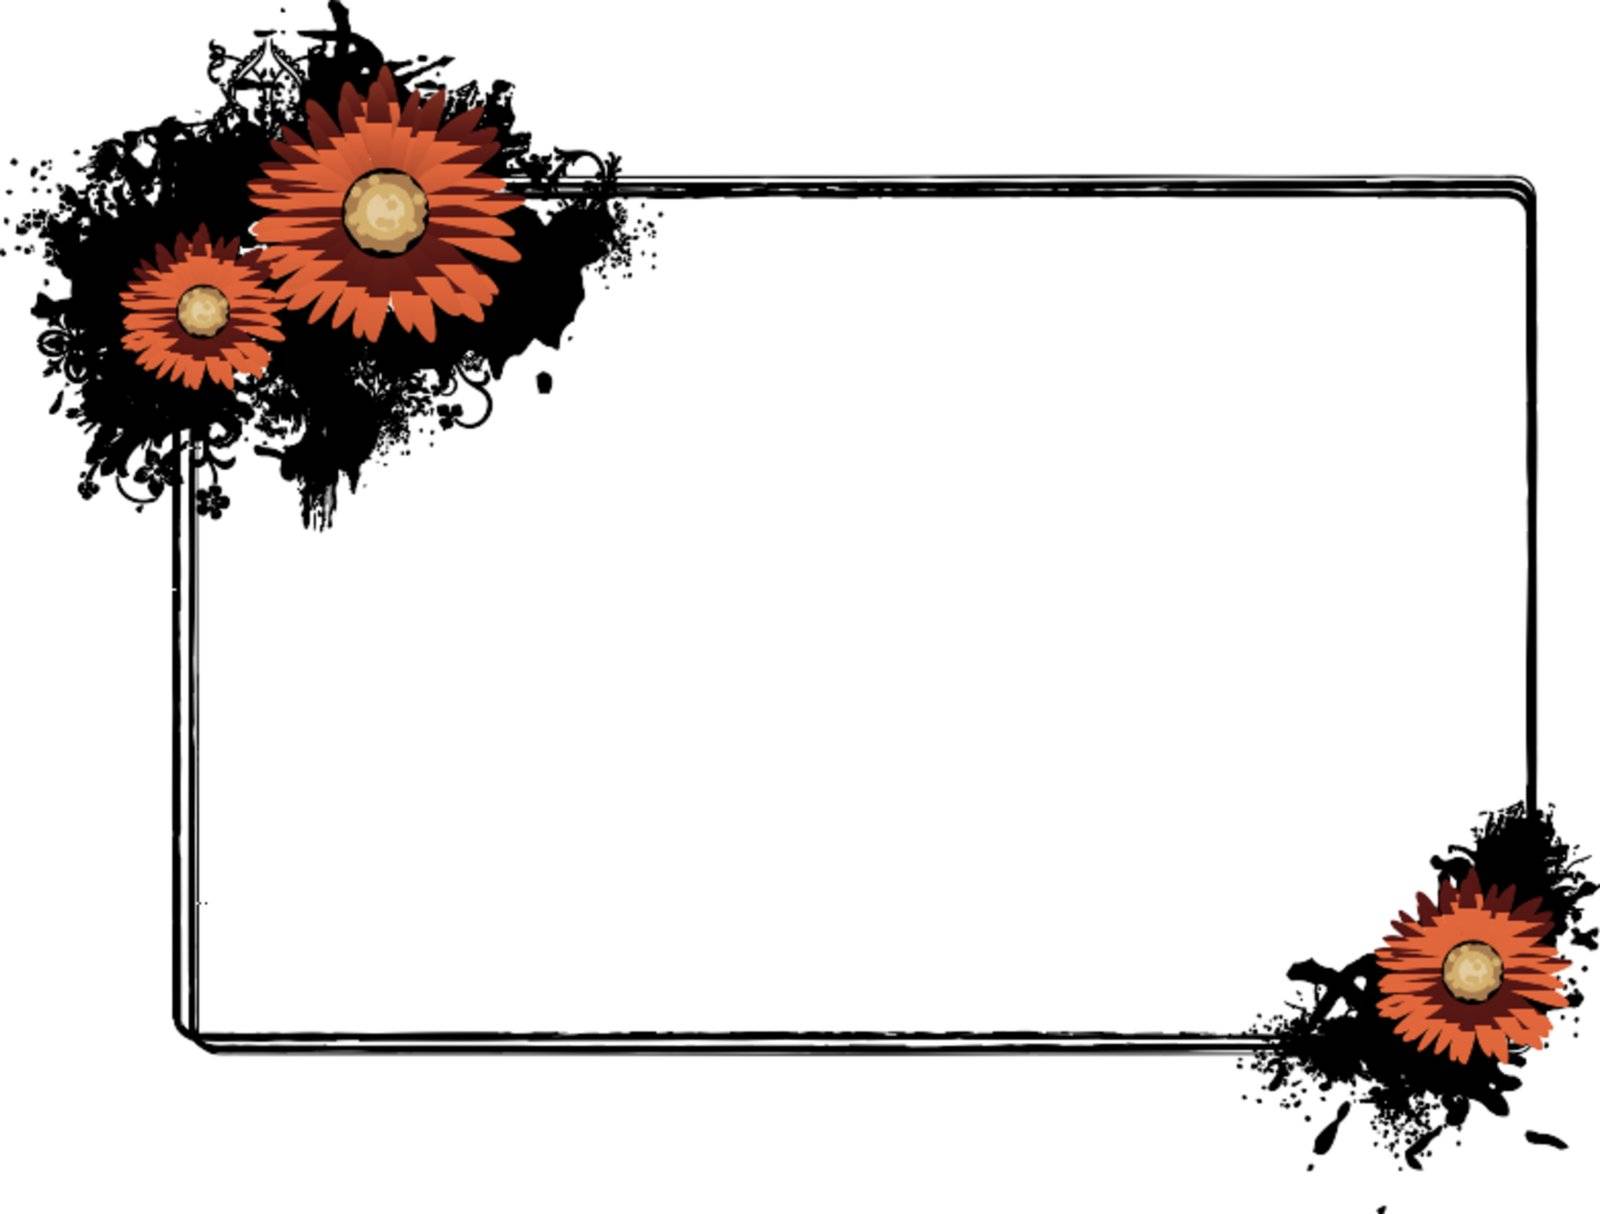 Vector illustration of a rectangular horizontal frame adorned with orange flowers in the southeast and northwest corners